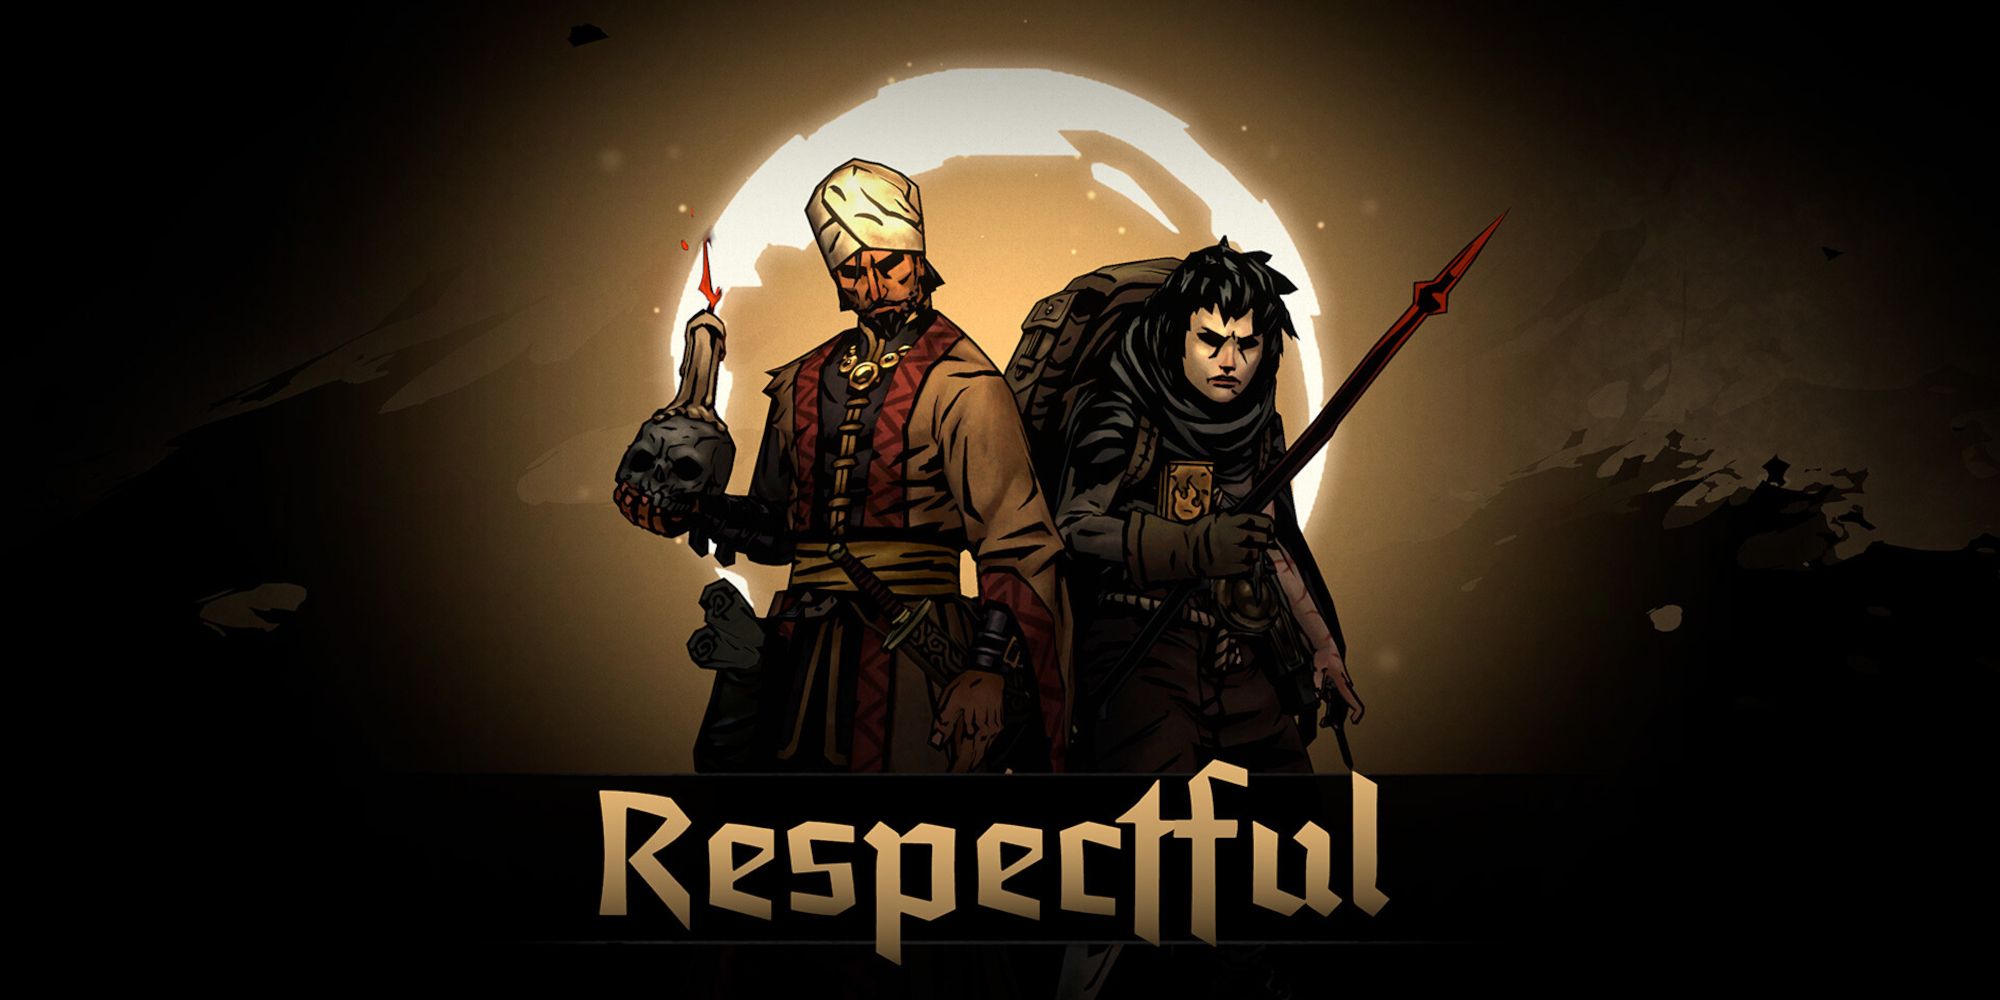 Respectful Relationship being formed between the Occultist and Runaway in Darkest Dungeon 2